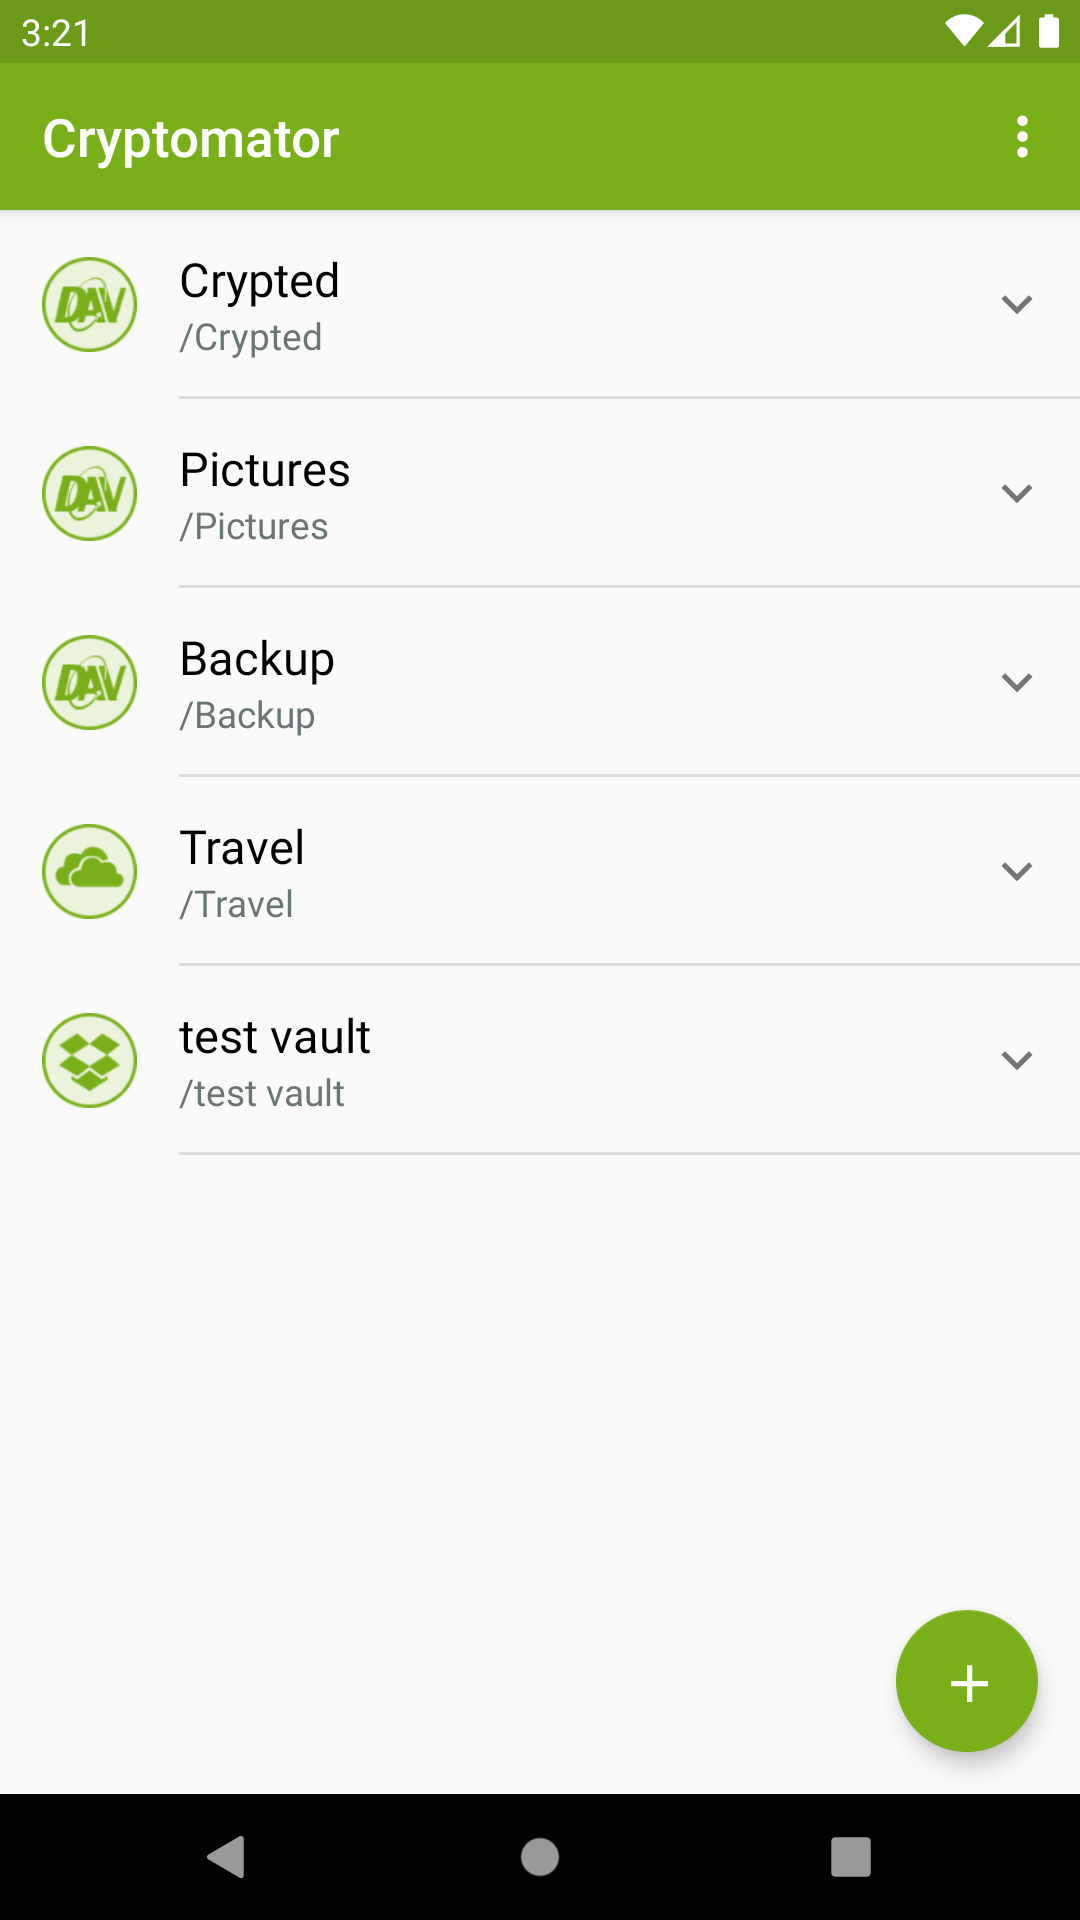 How to add a vault with Android